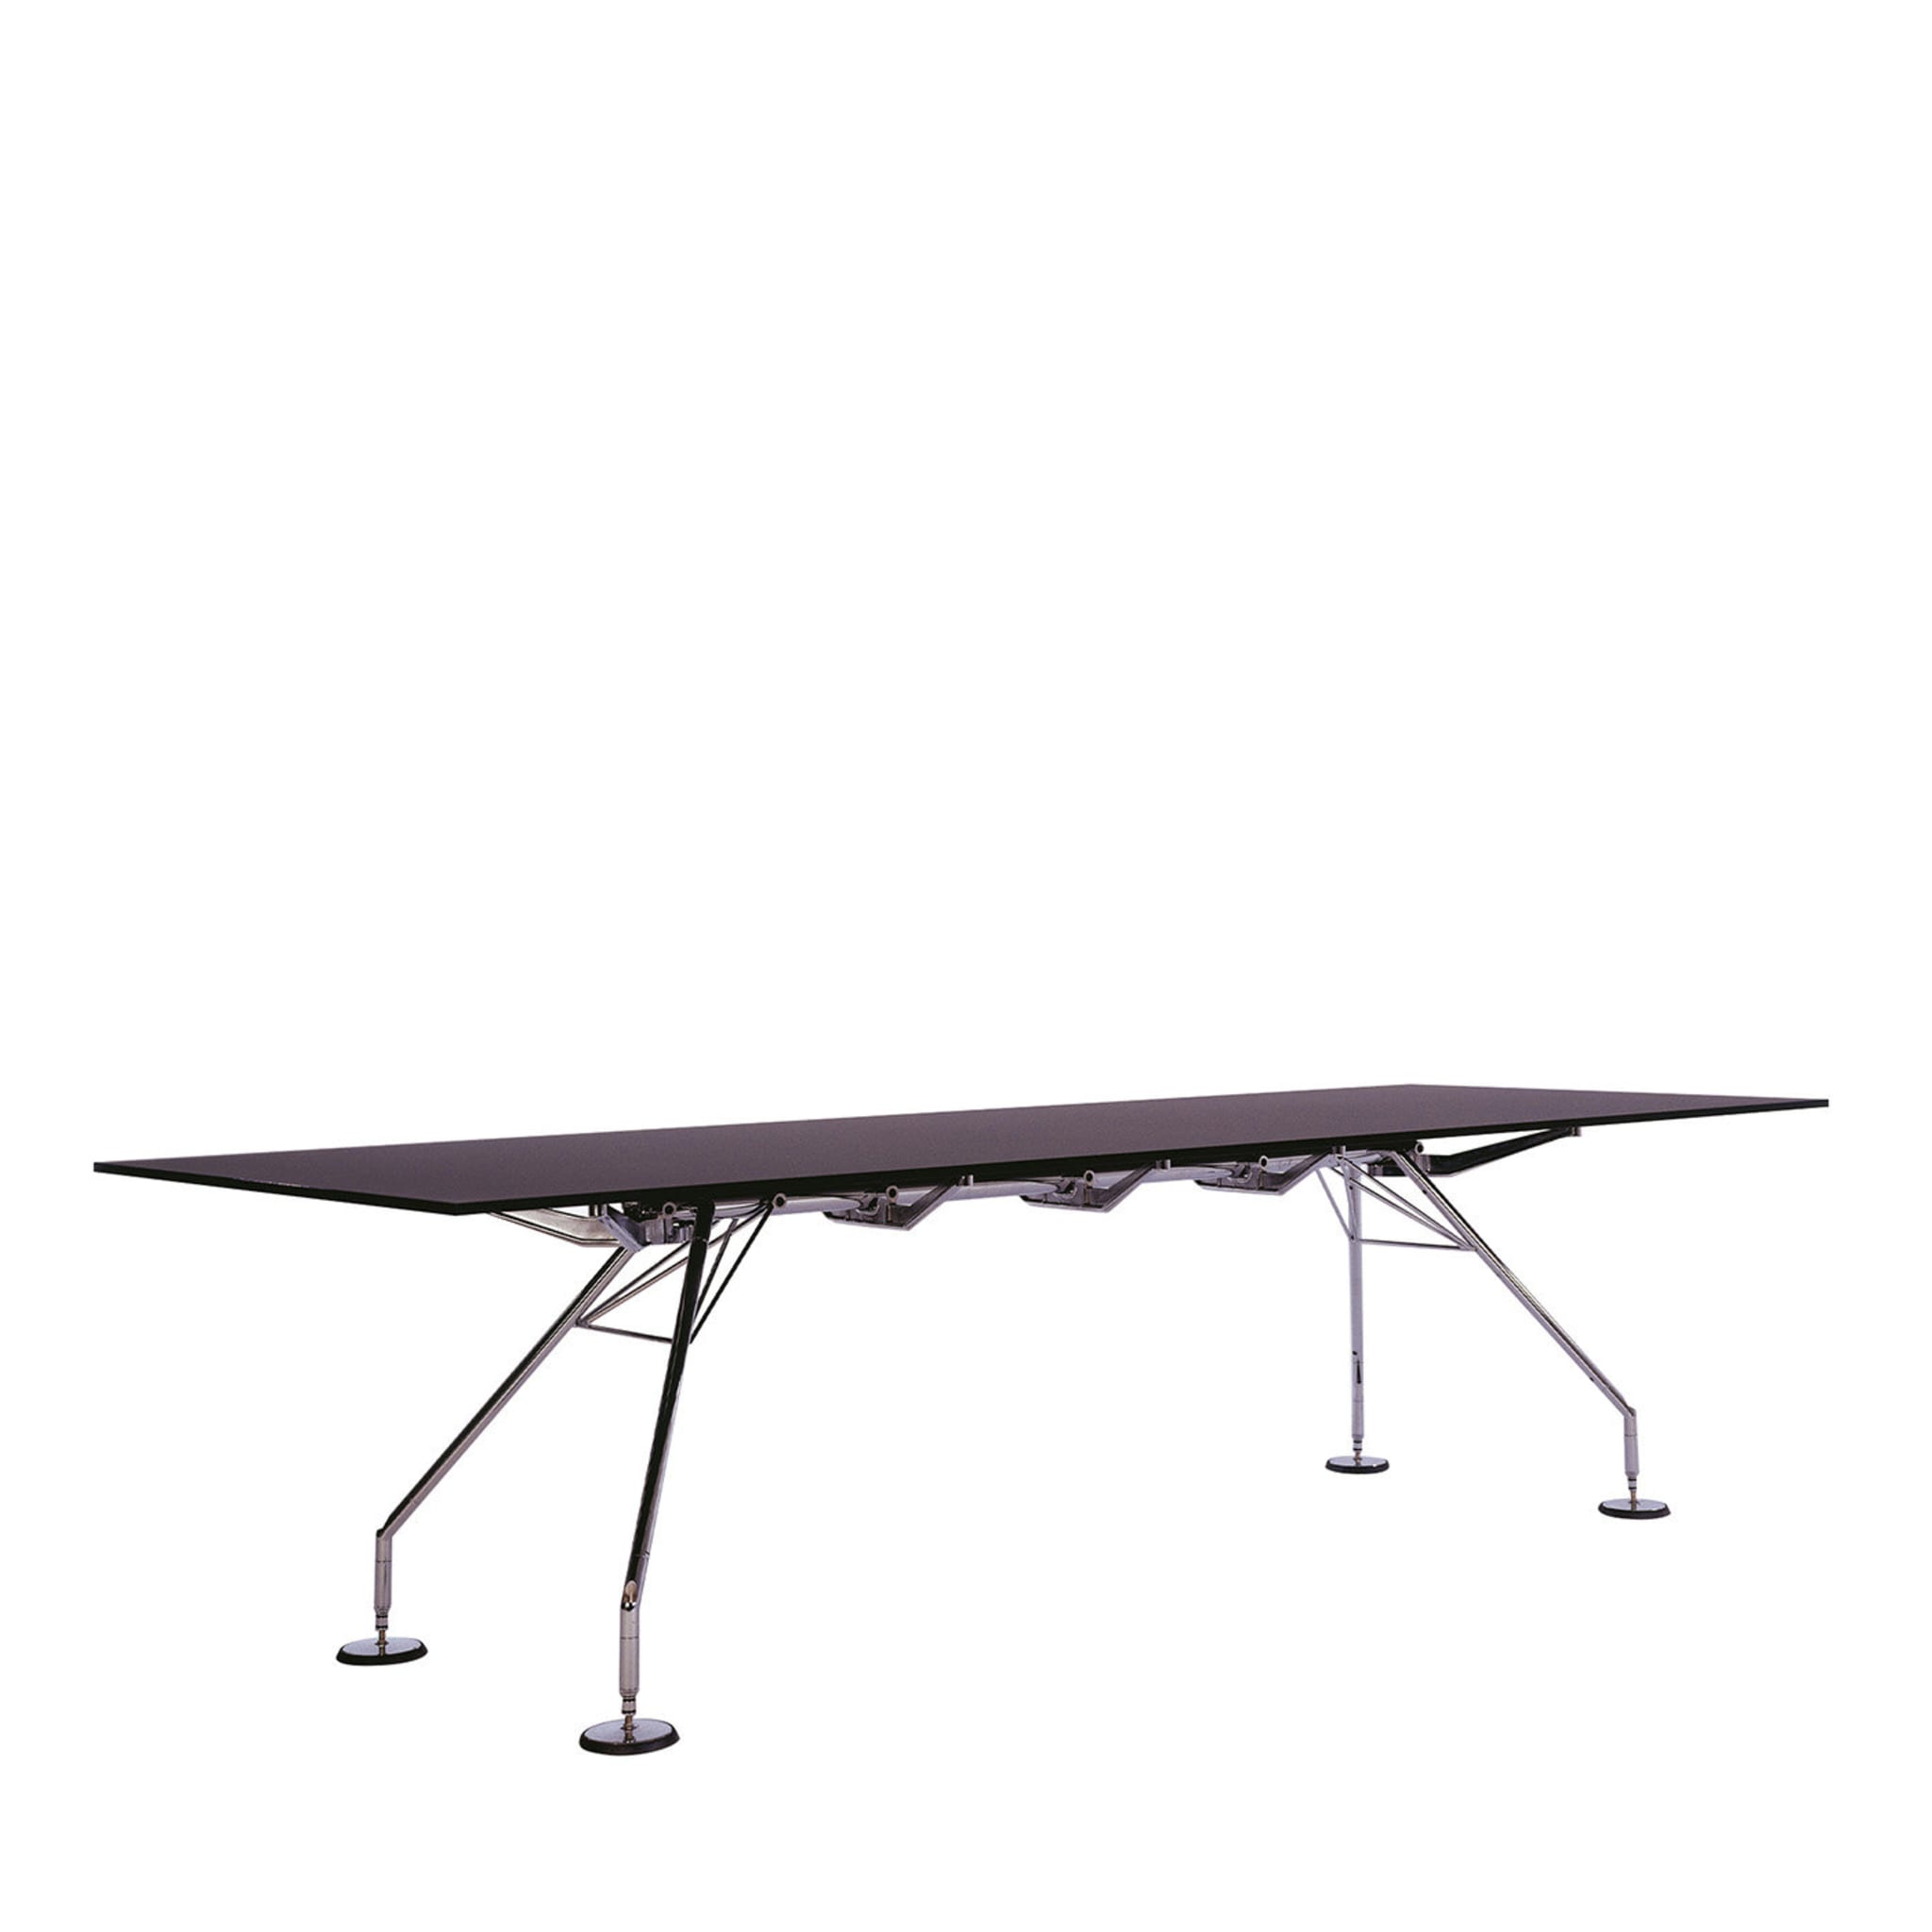 Nomos Black Table by Norman Foster - Main view